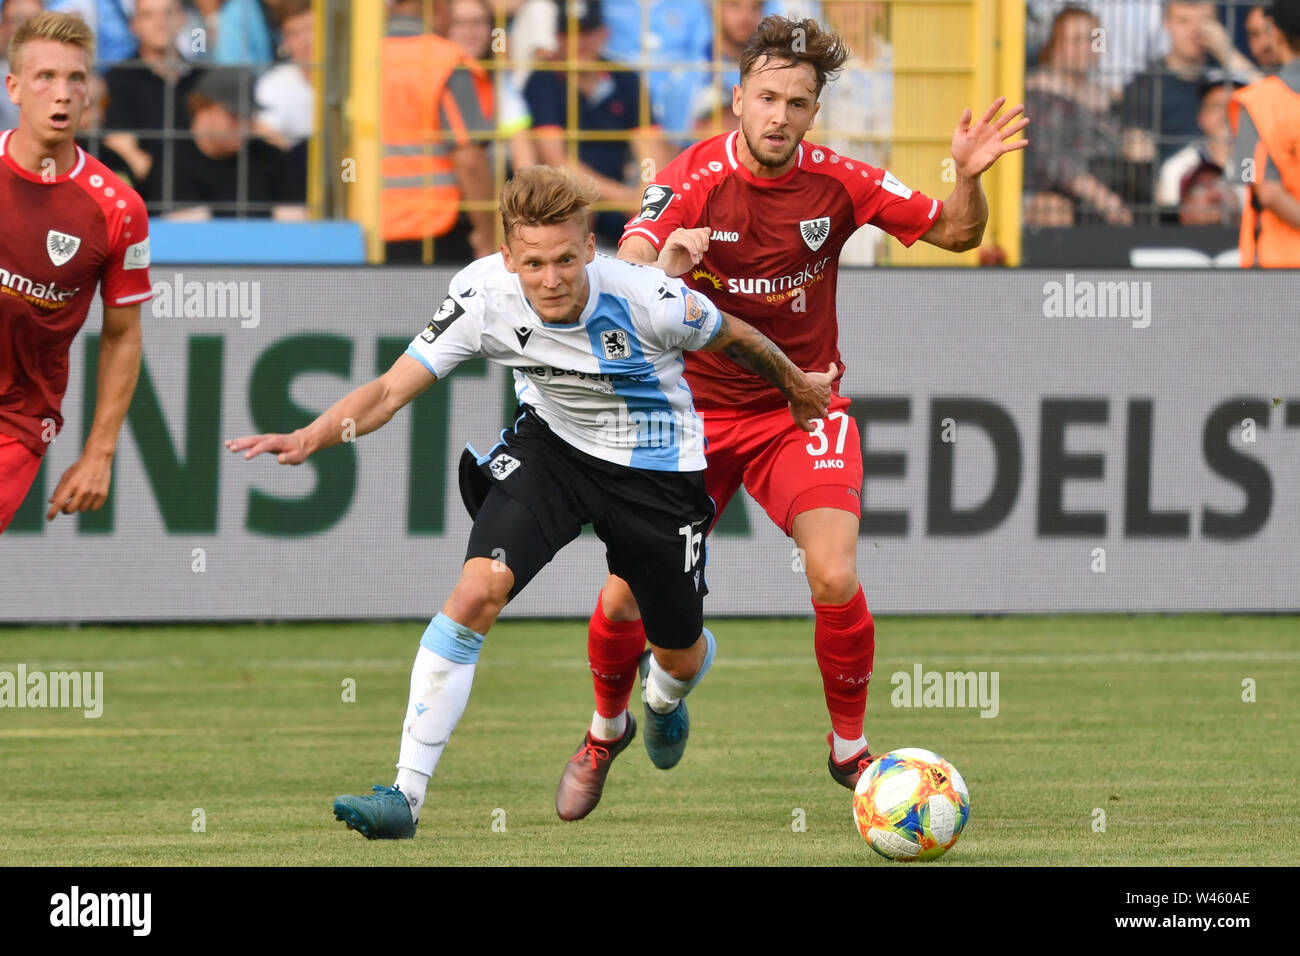 Munich, Deutschland. 19th July, 2019. Benjamin KINDSVATER (TSV Munich 1860), action, duels versus Lucas CUETO (MS). Soccer 3. Liga, 1. matchday, TSV Munich 1860-Prussia Muenster 1-1, on 19.07.2019 Stadium at Gruenwalder Strasse in Munich, DFL REGULATIONS PROHIBIT ANY USE OF PHOTOGRAPHS AS IMAGE SEQUENCES AND/OR QUASI-VIDEO. | usage worldwide Credit: dpa/Alamy Live News Stock Photo